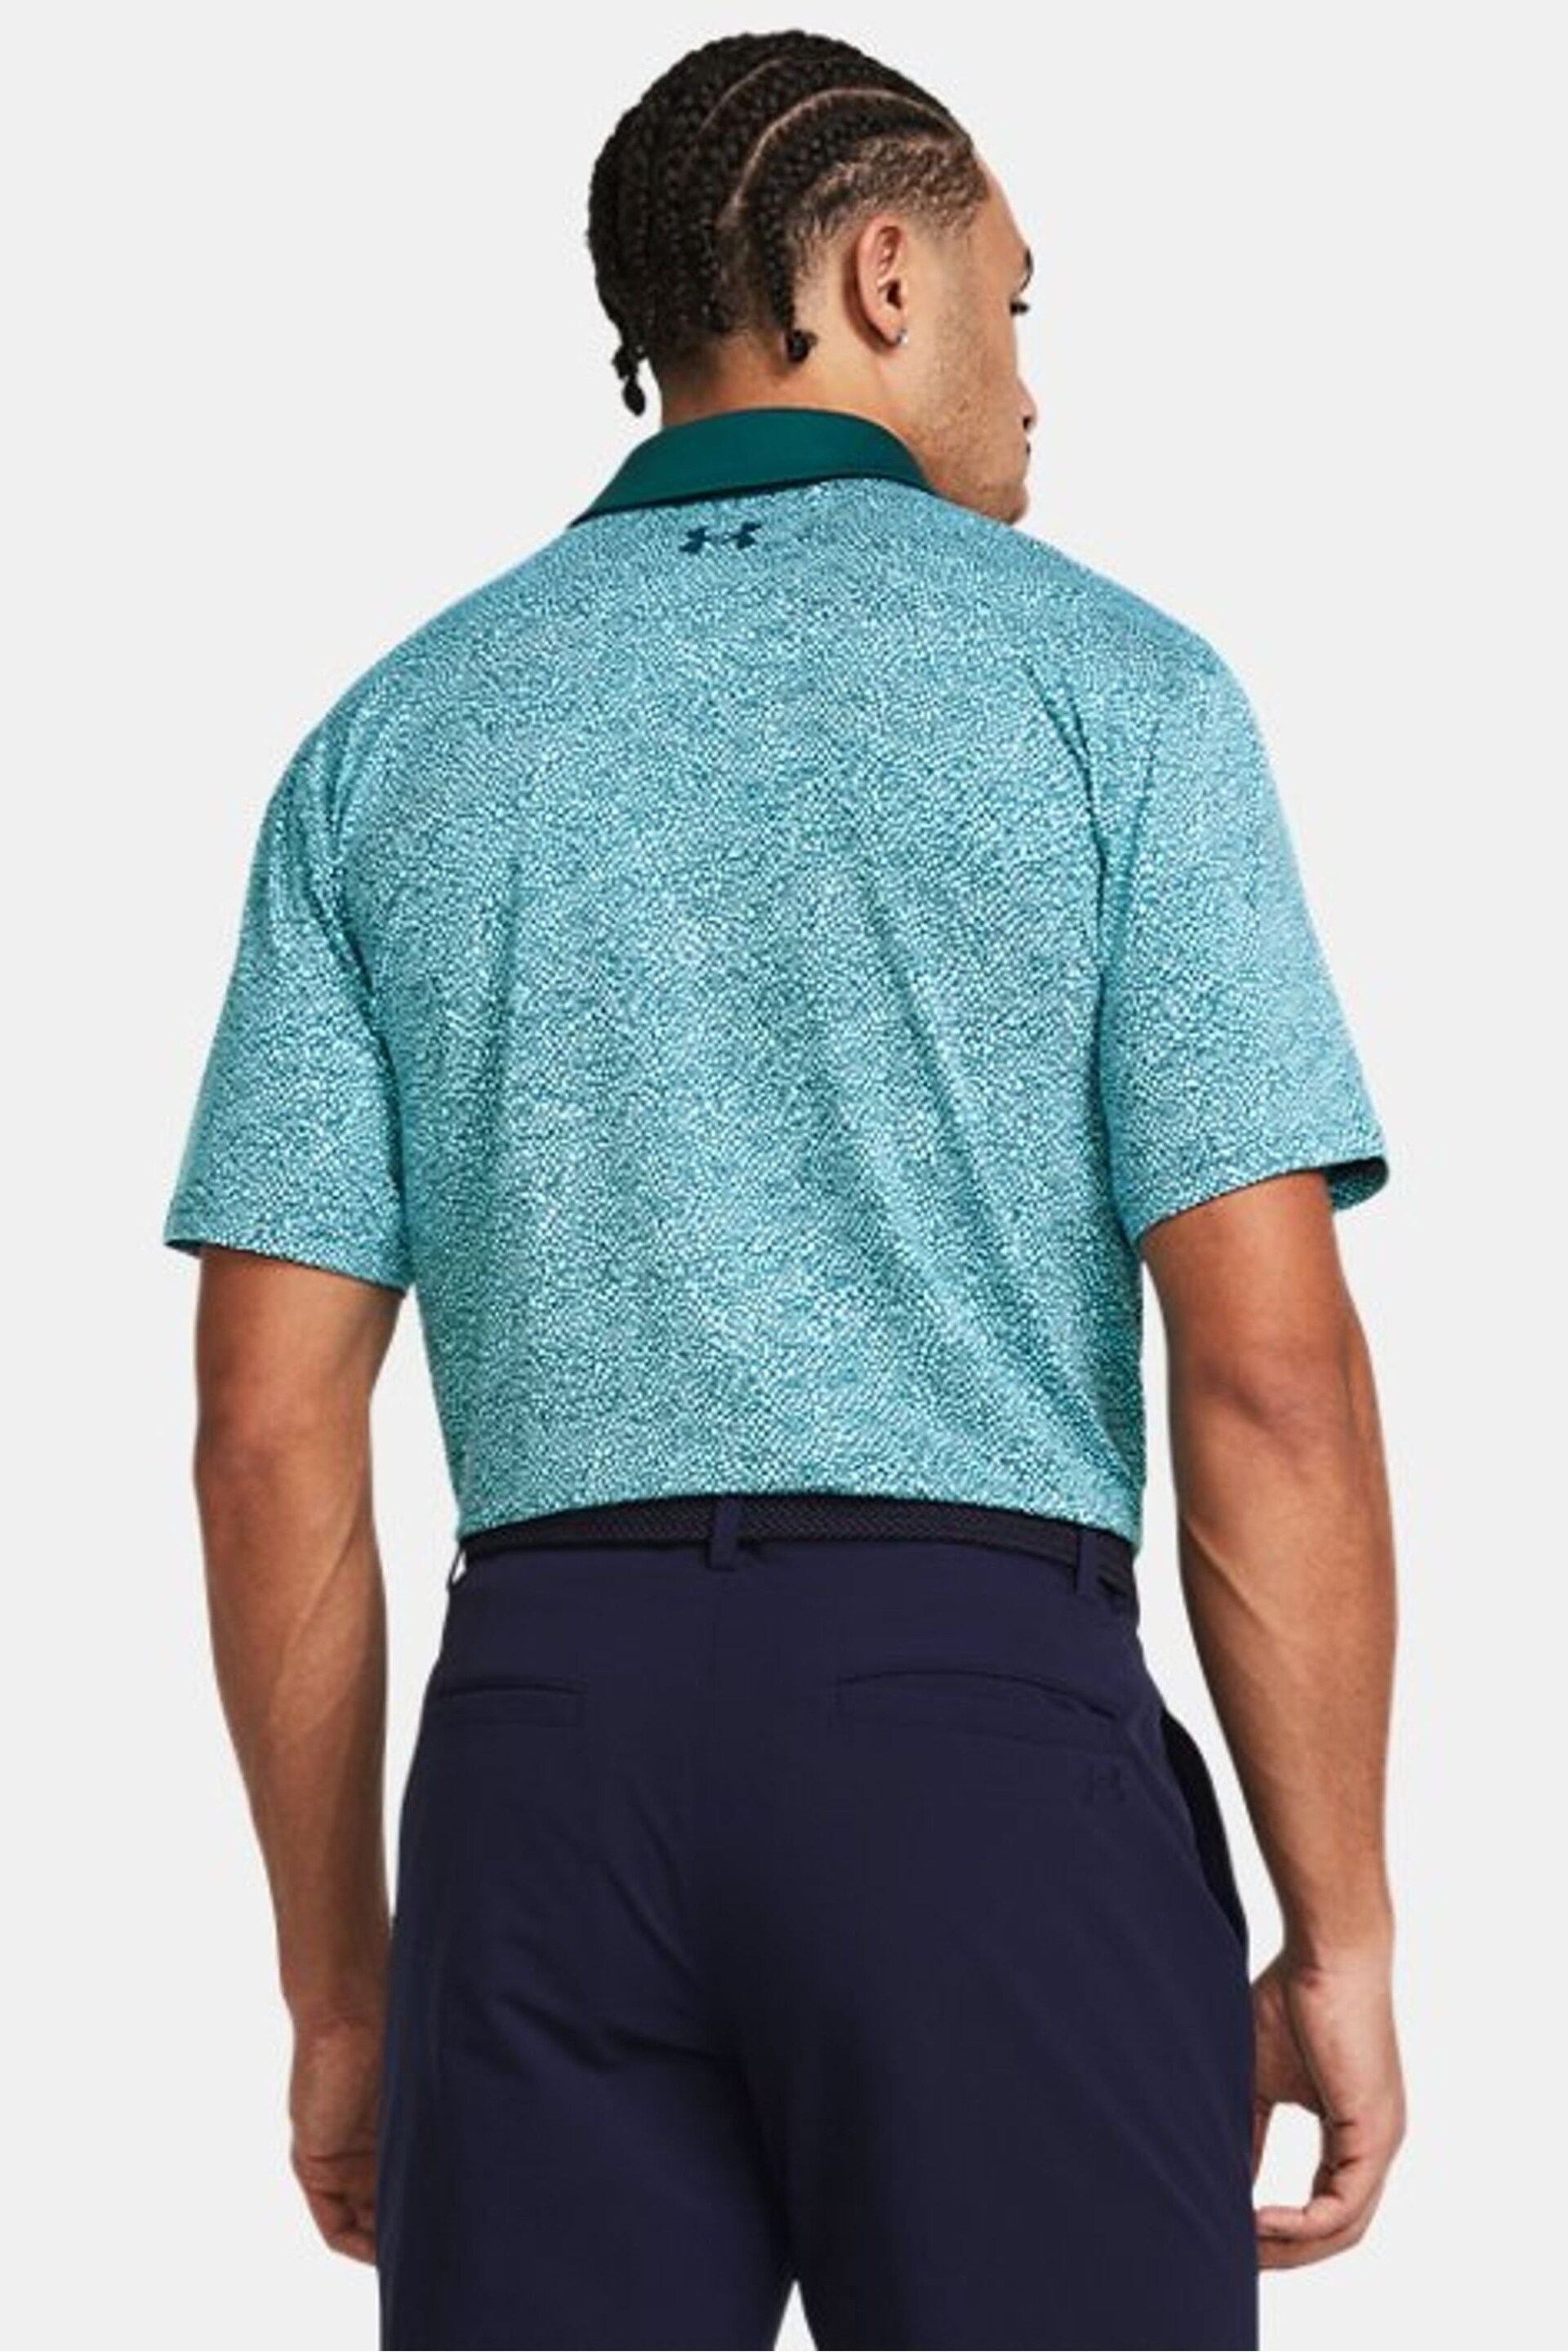 Under Armour Turquoise Blue Golf T2G Printed Polo Shirt - Image 2 of 2